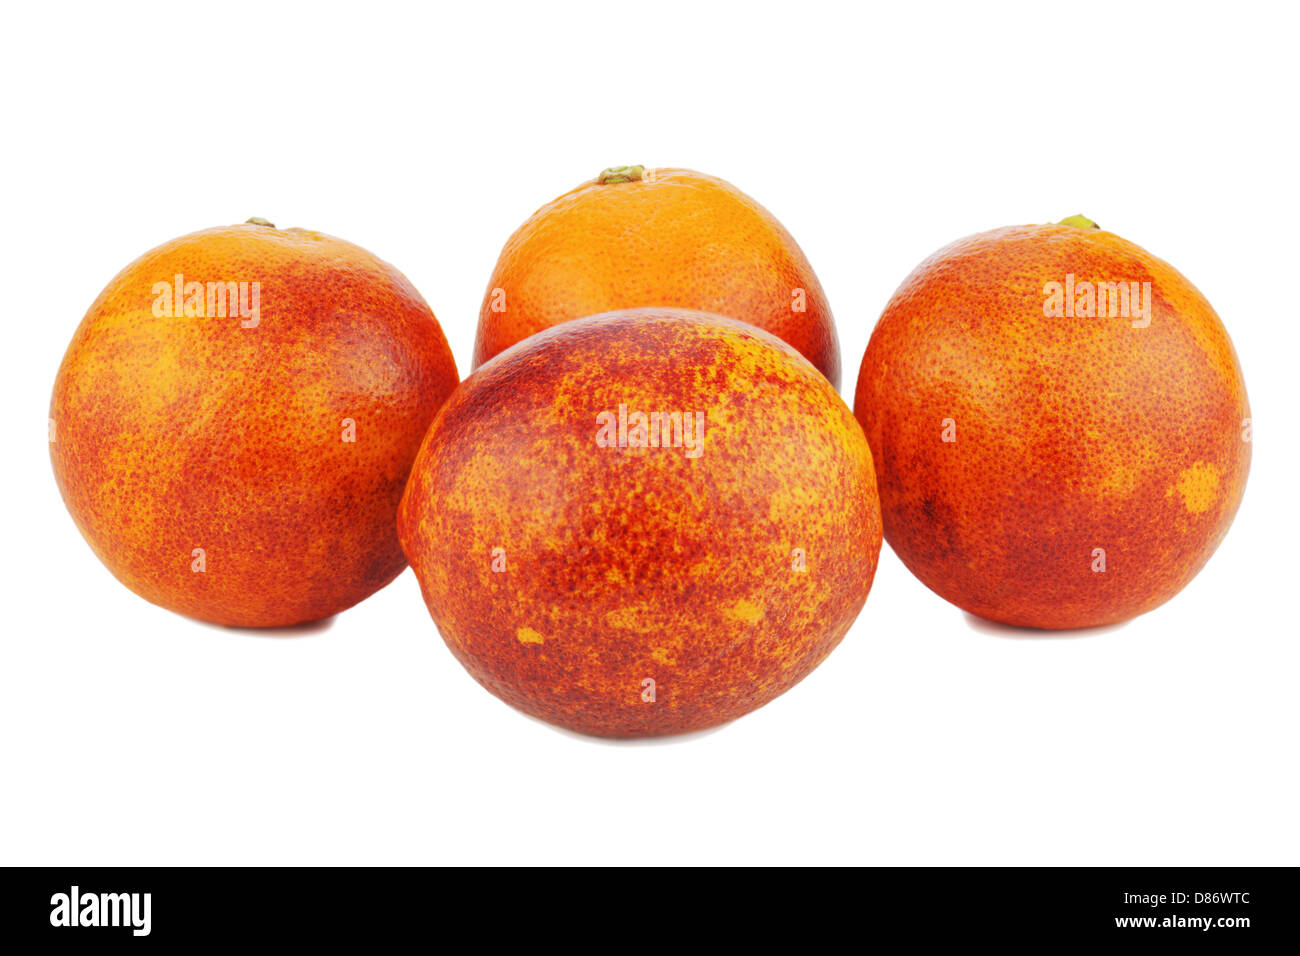 Ripe red blood oranges isolated on white background. Stock Photo